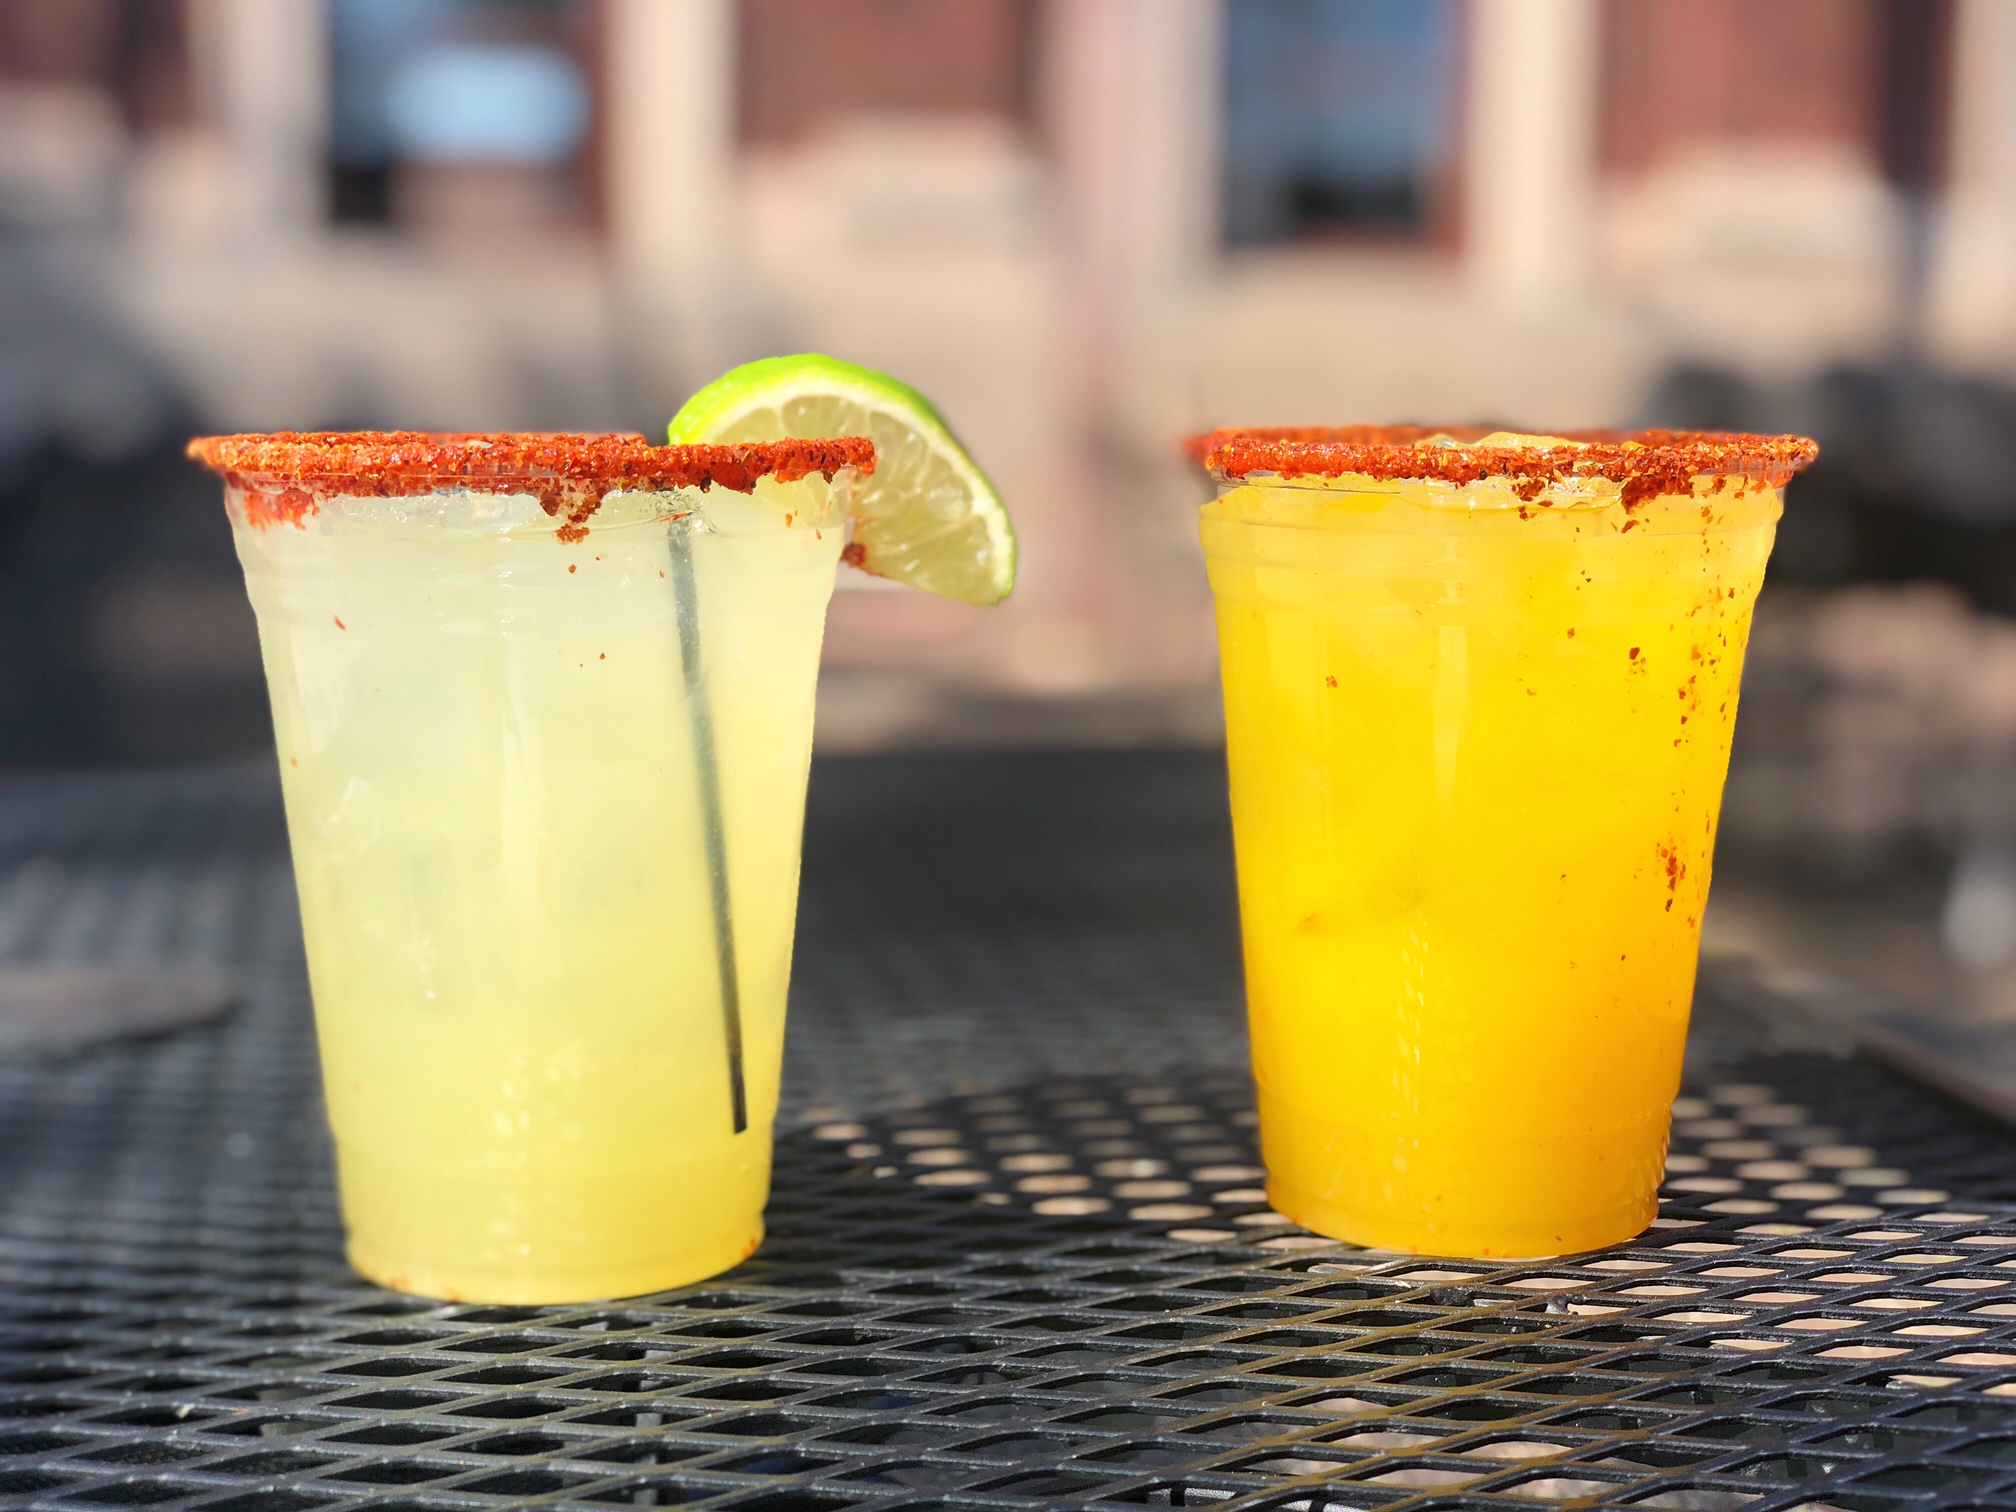 Two margaritas from Maize sit on the black metal outdoor patio table. The one on the left is light green, and the one on the right is orange. Photo by Alyssa Buckley.